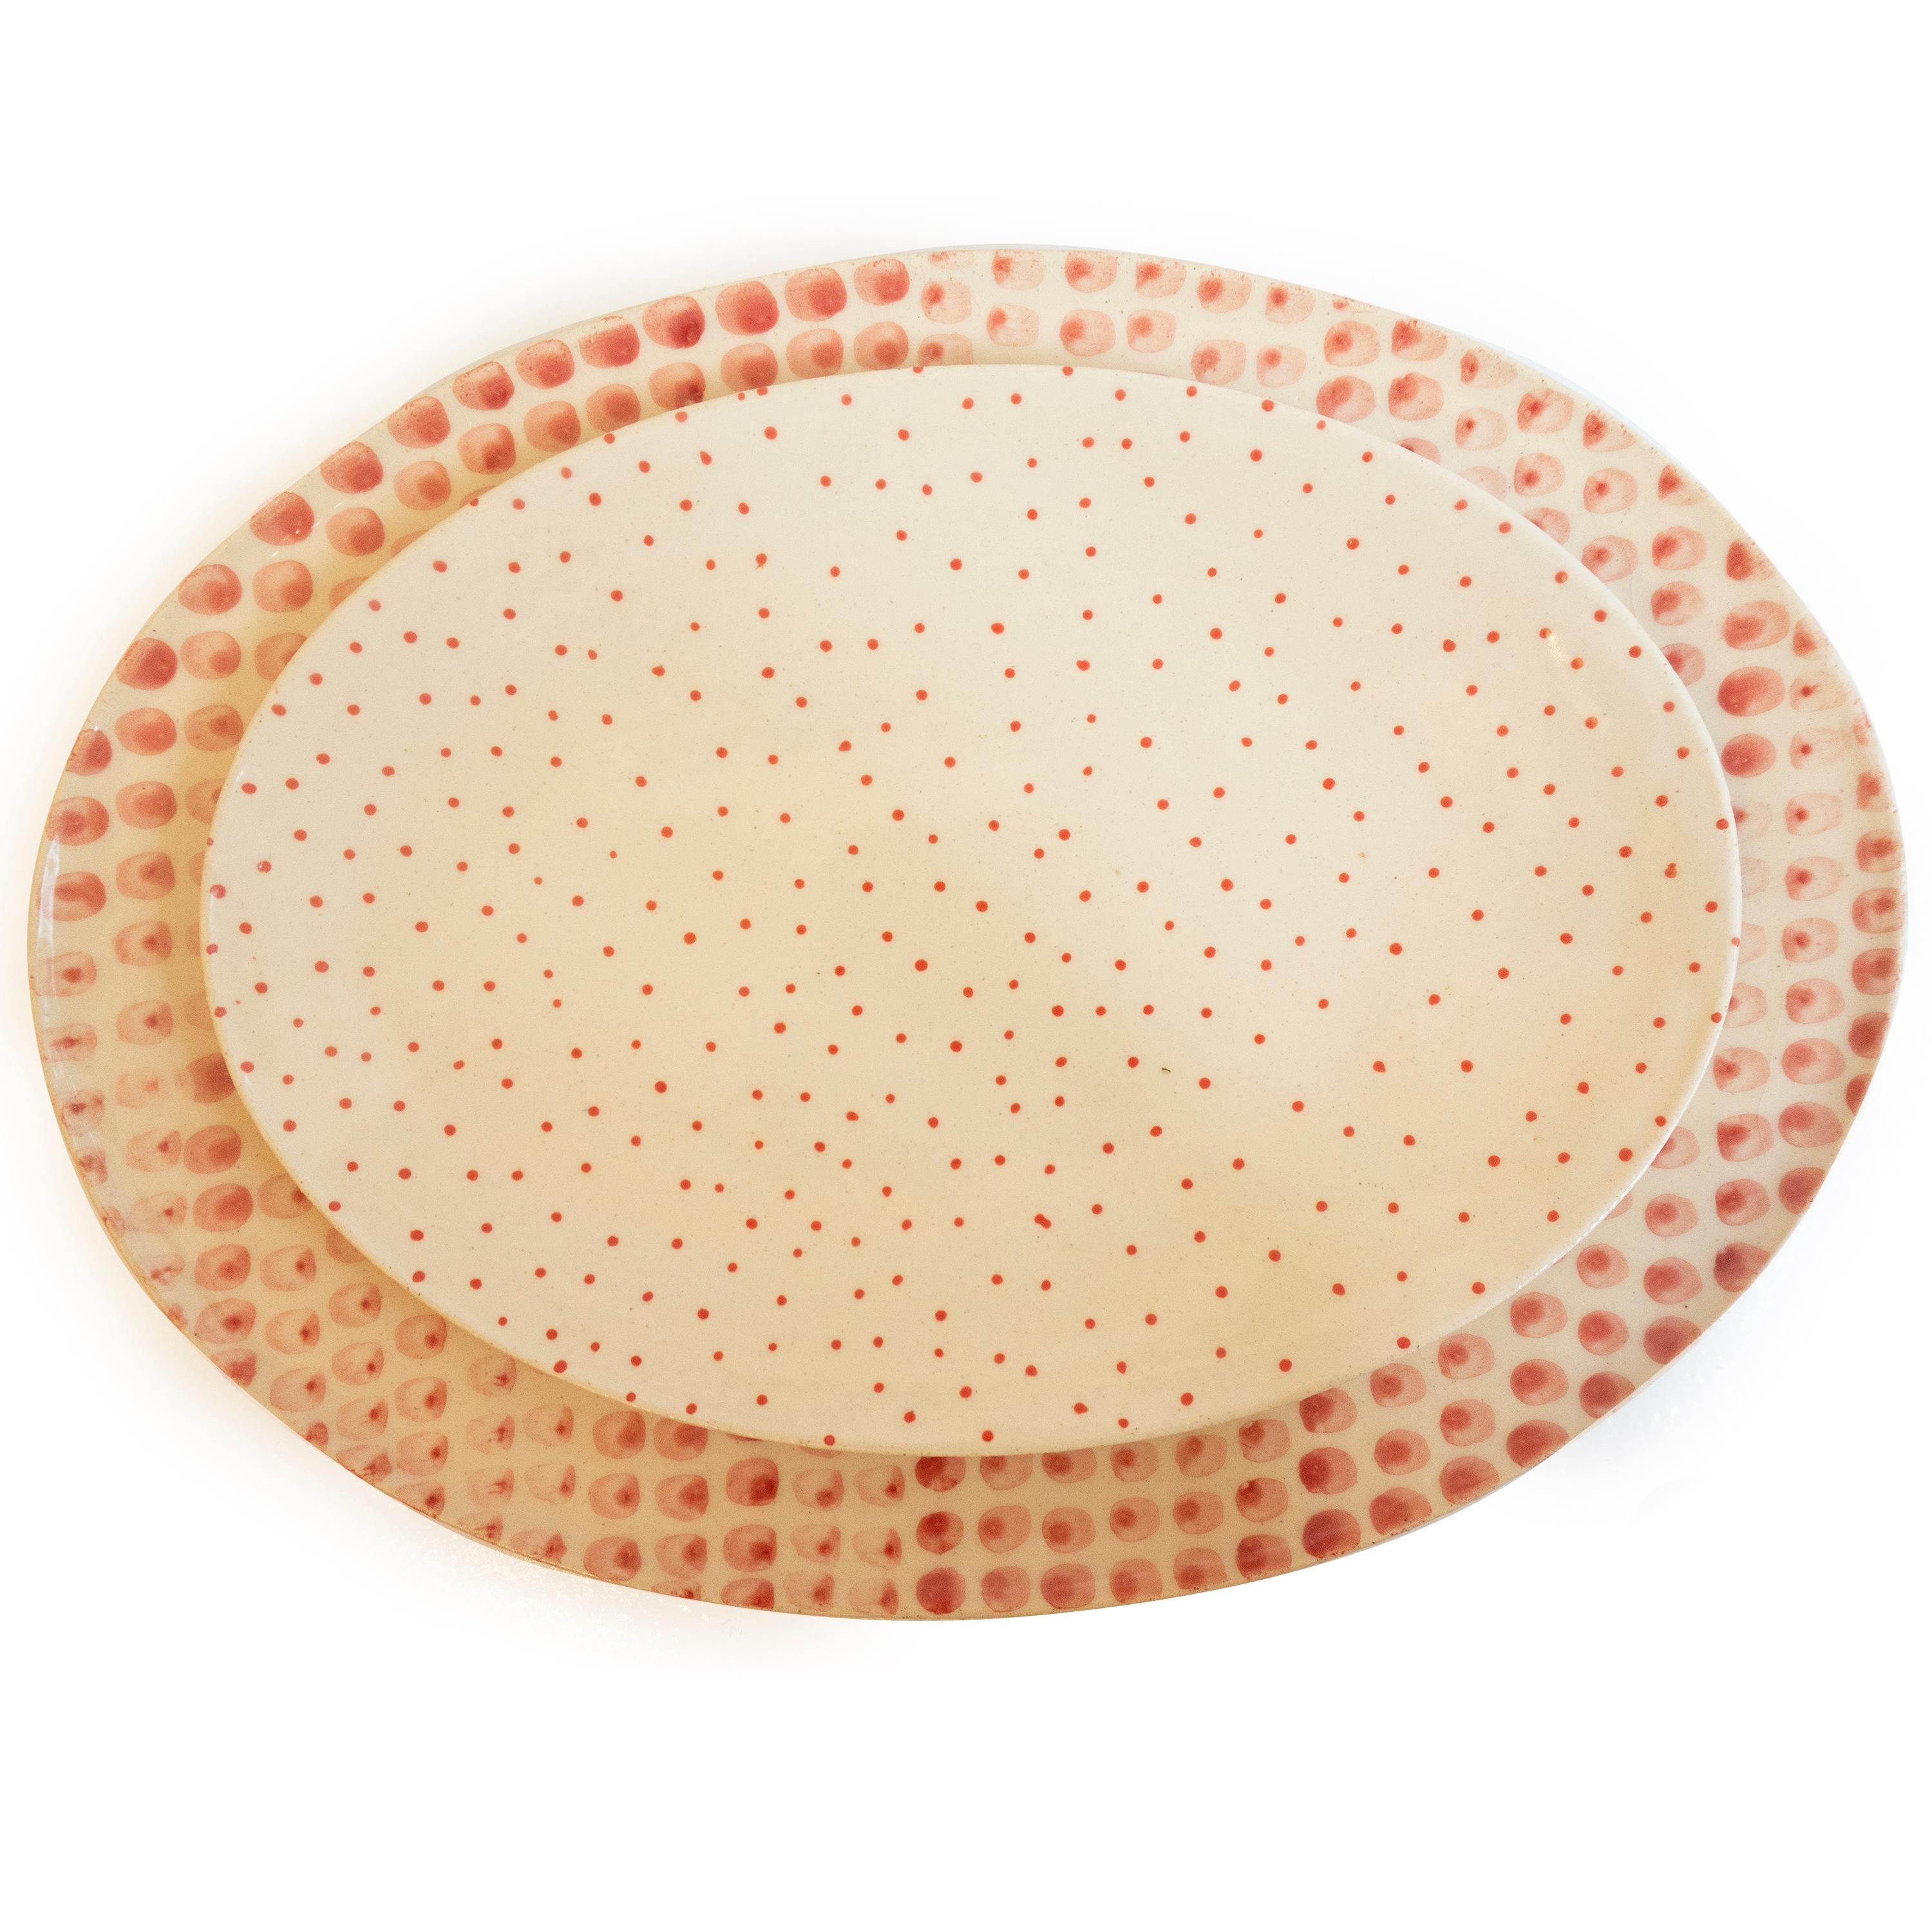 Glazed Hand Painted Ceramic Serving Platter with Dot Pattern